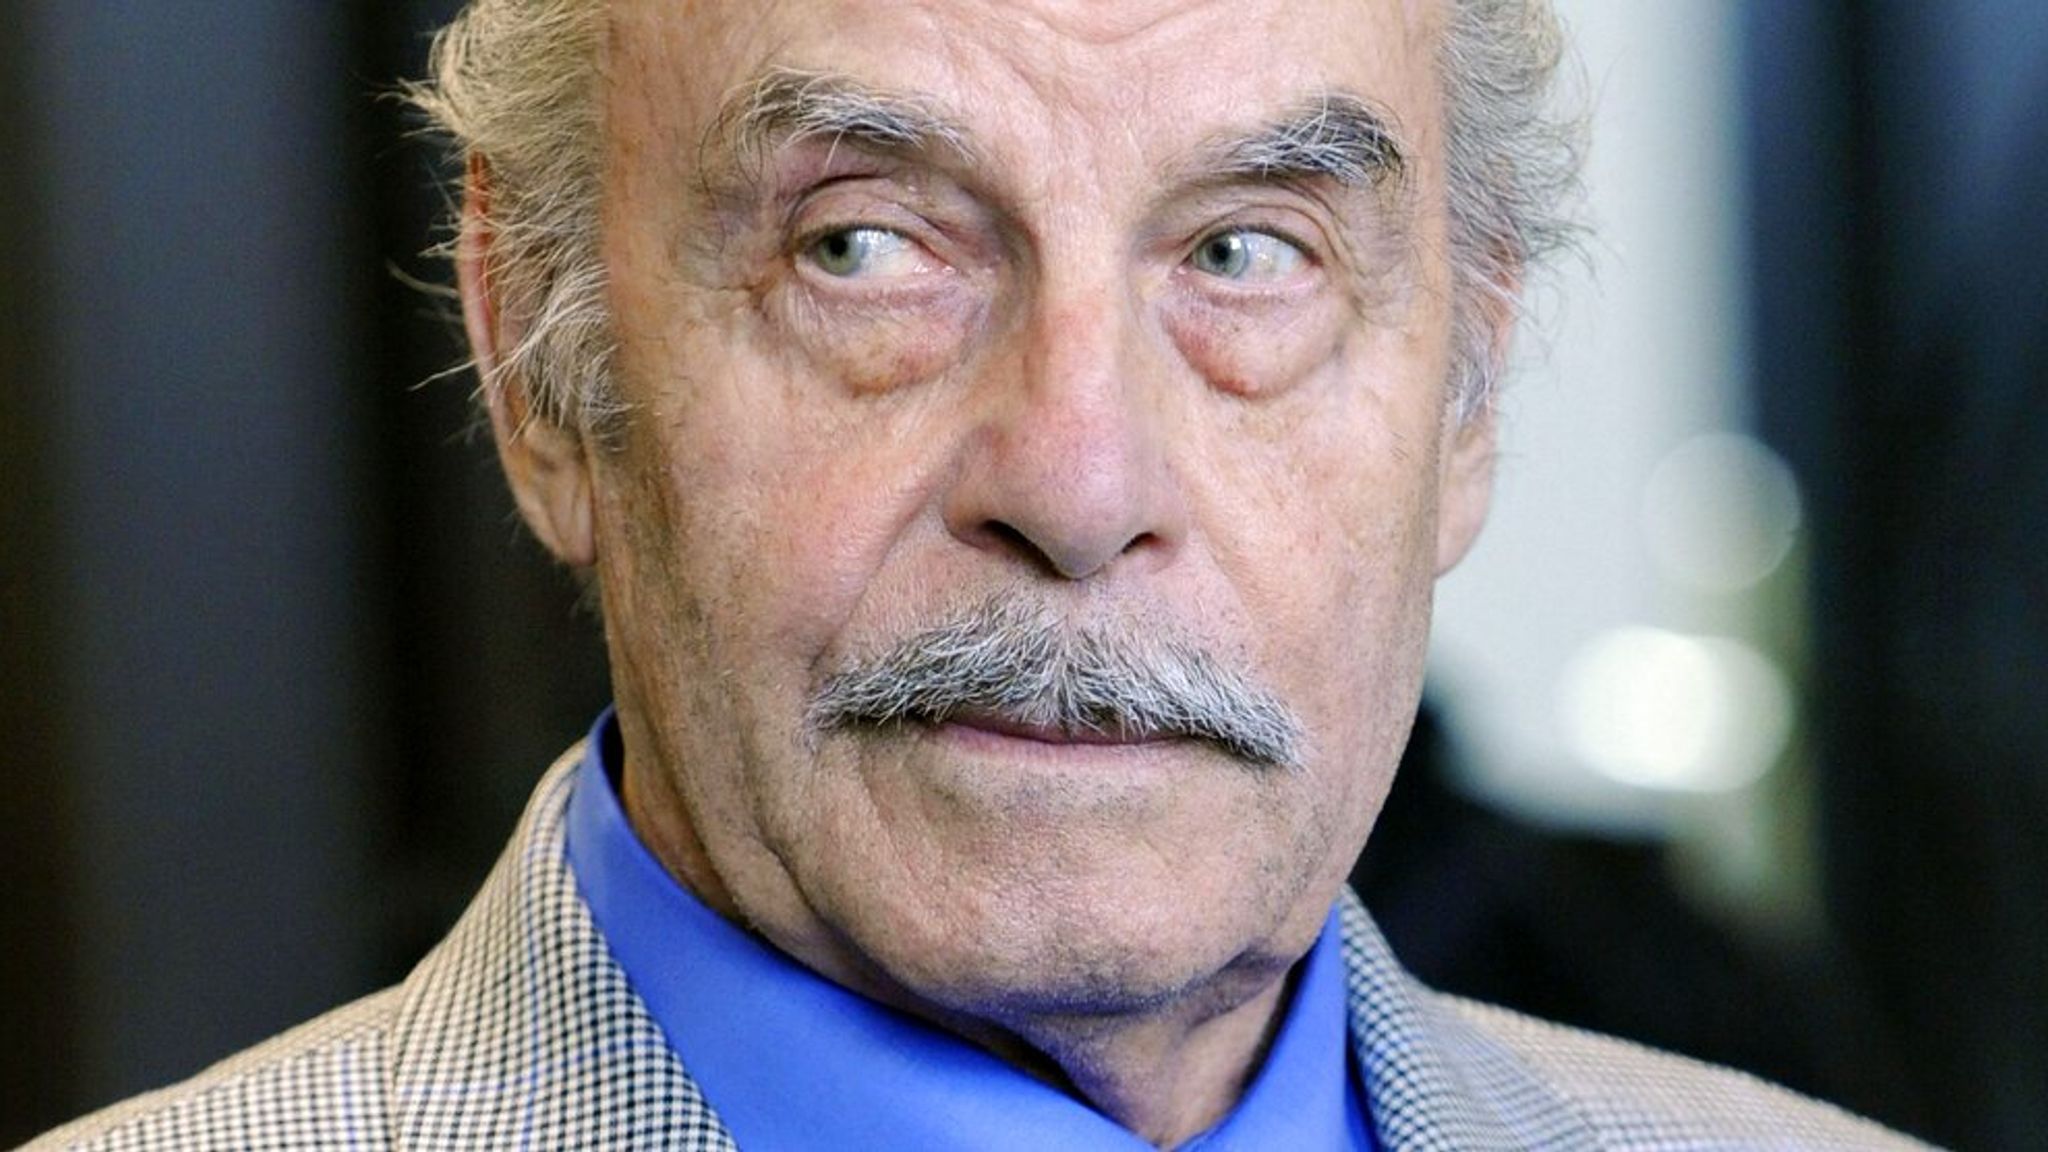 Josef Fritzl: Lawyer says Austrian who raped and enslaved his daughter should be moved to care home as he's labelled 'no longer a danger'